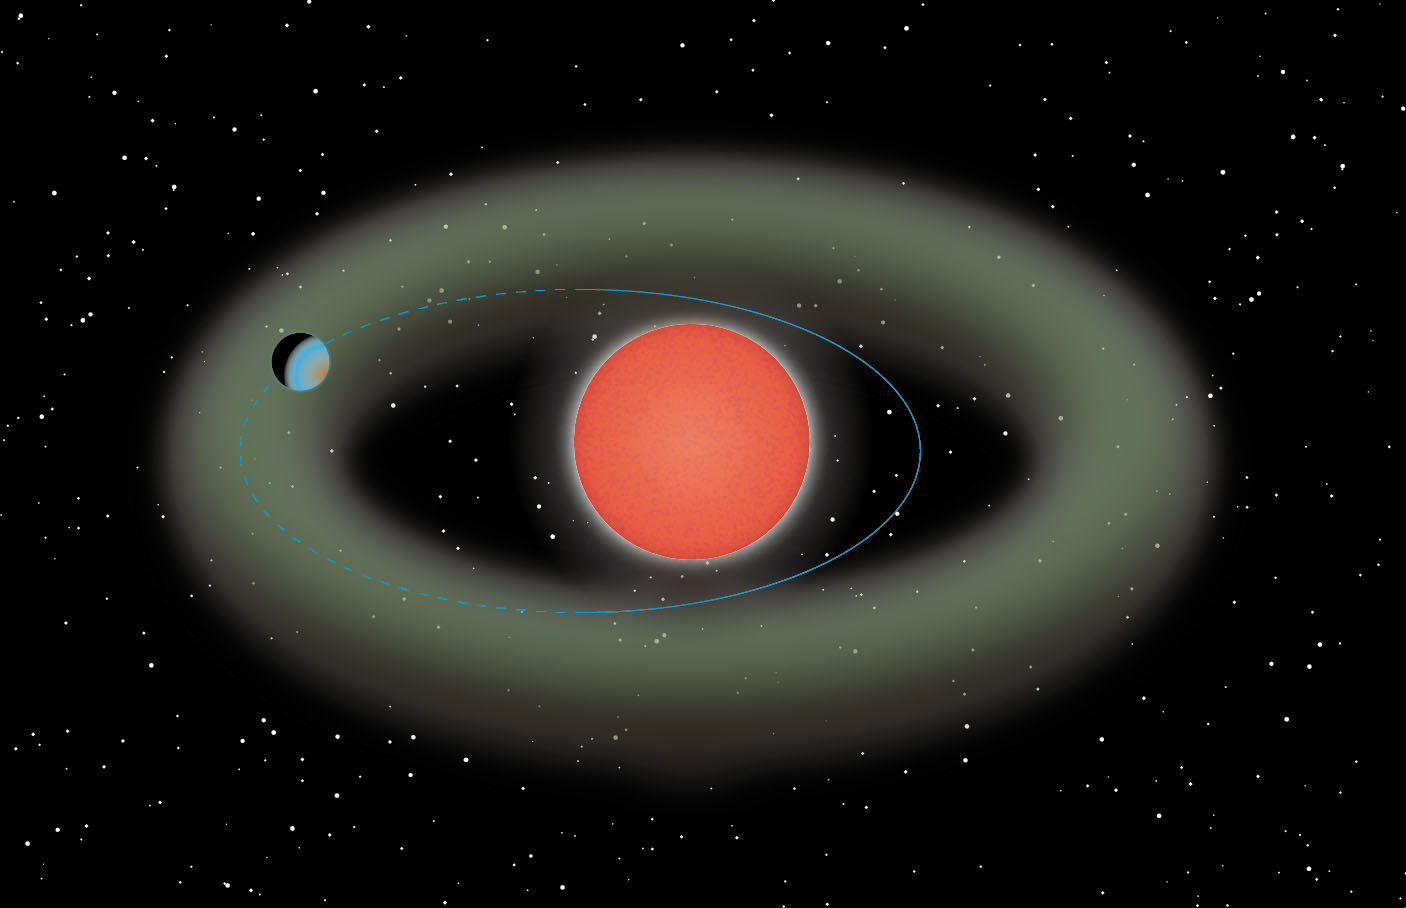 Schematic diagram of the newly discovered Ross 508 planetary system